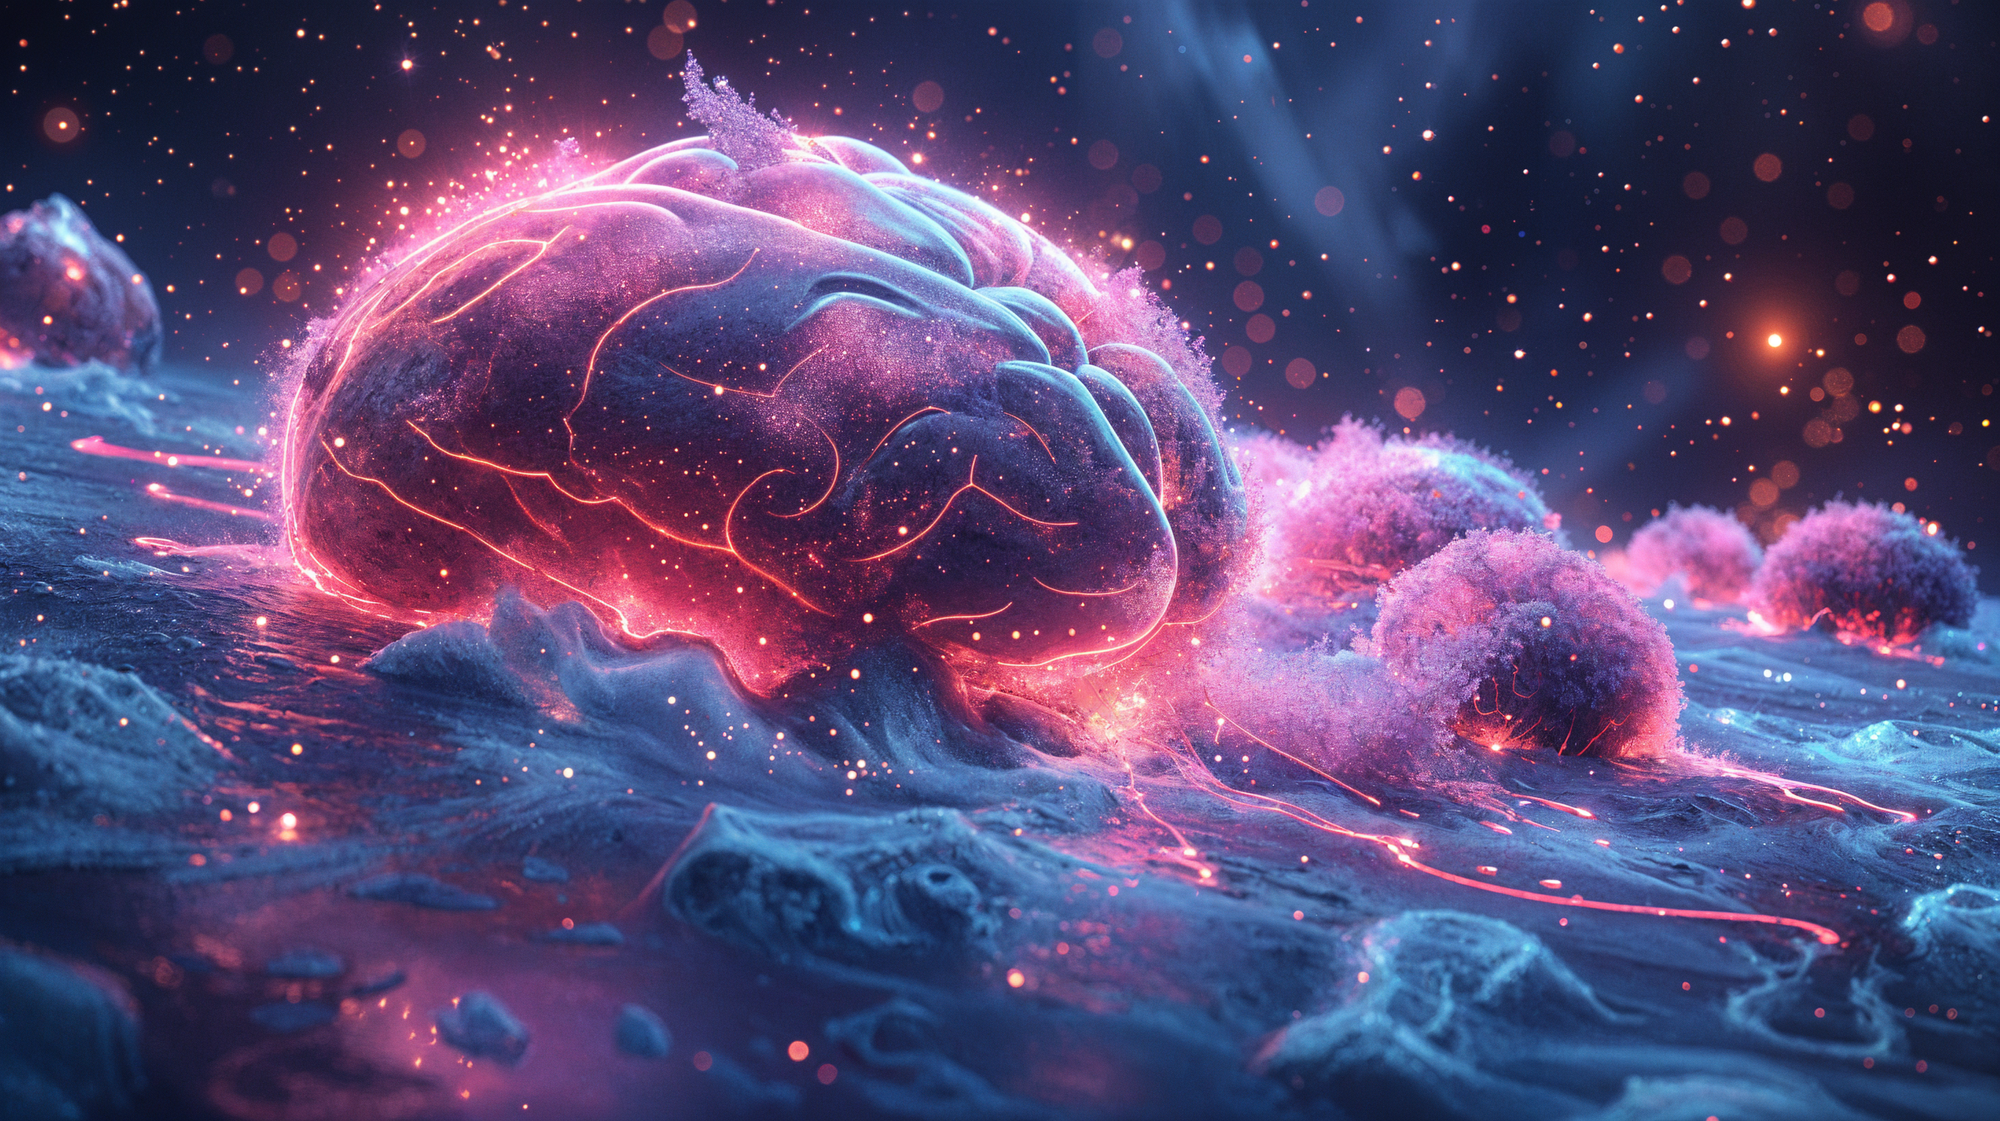 Abstract depiction of a glowing brain in pink hues against a dark, starry backdrop, evoking a mystical aura.